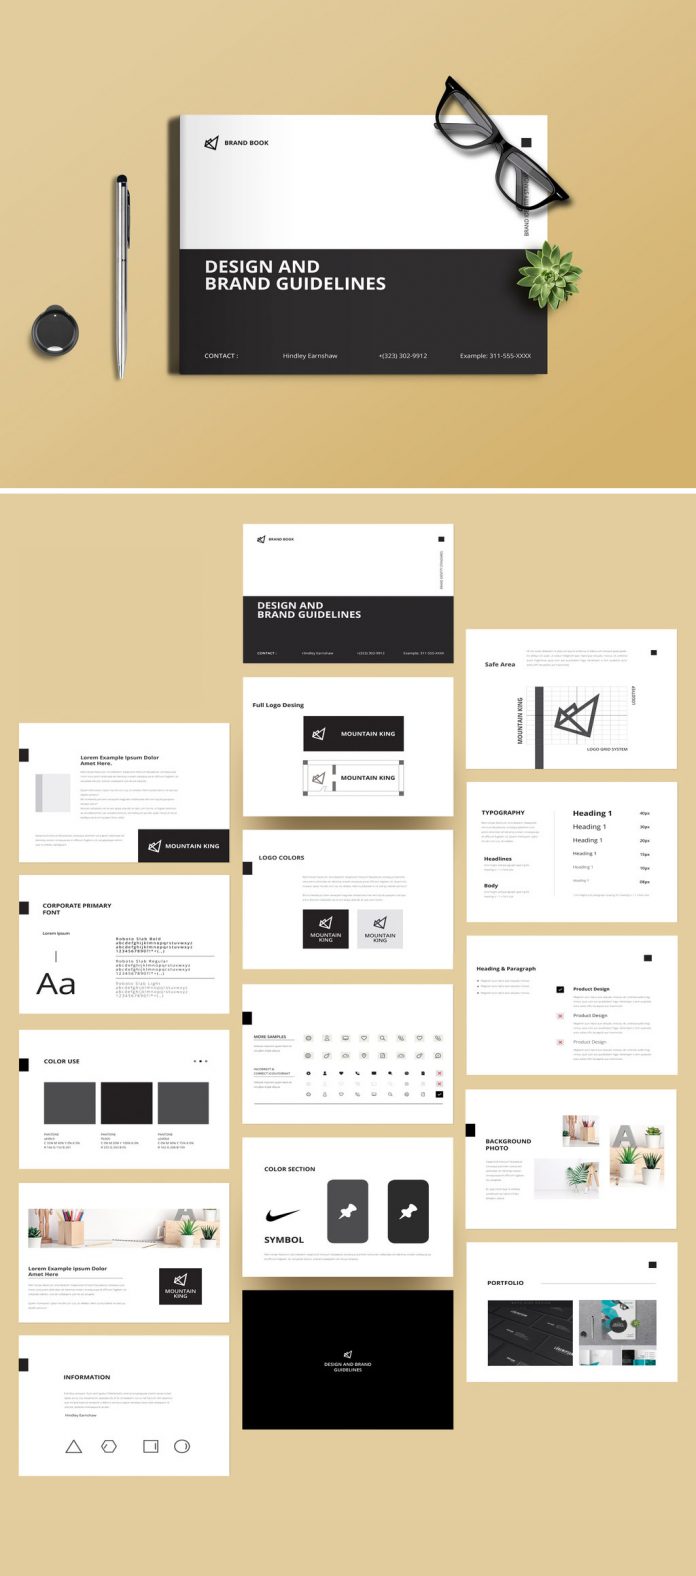 Minimalist black and white brand guidelines template for Adobe InDesign.